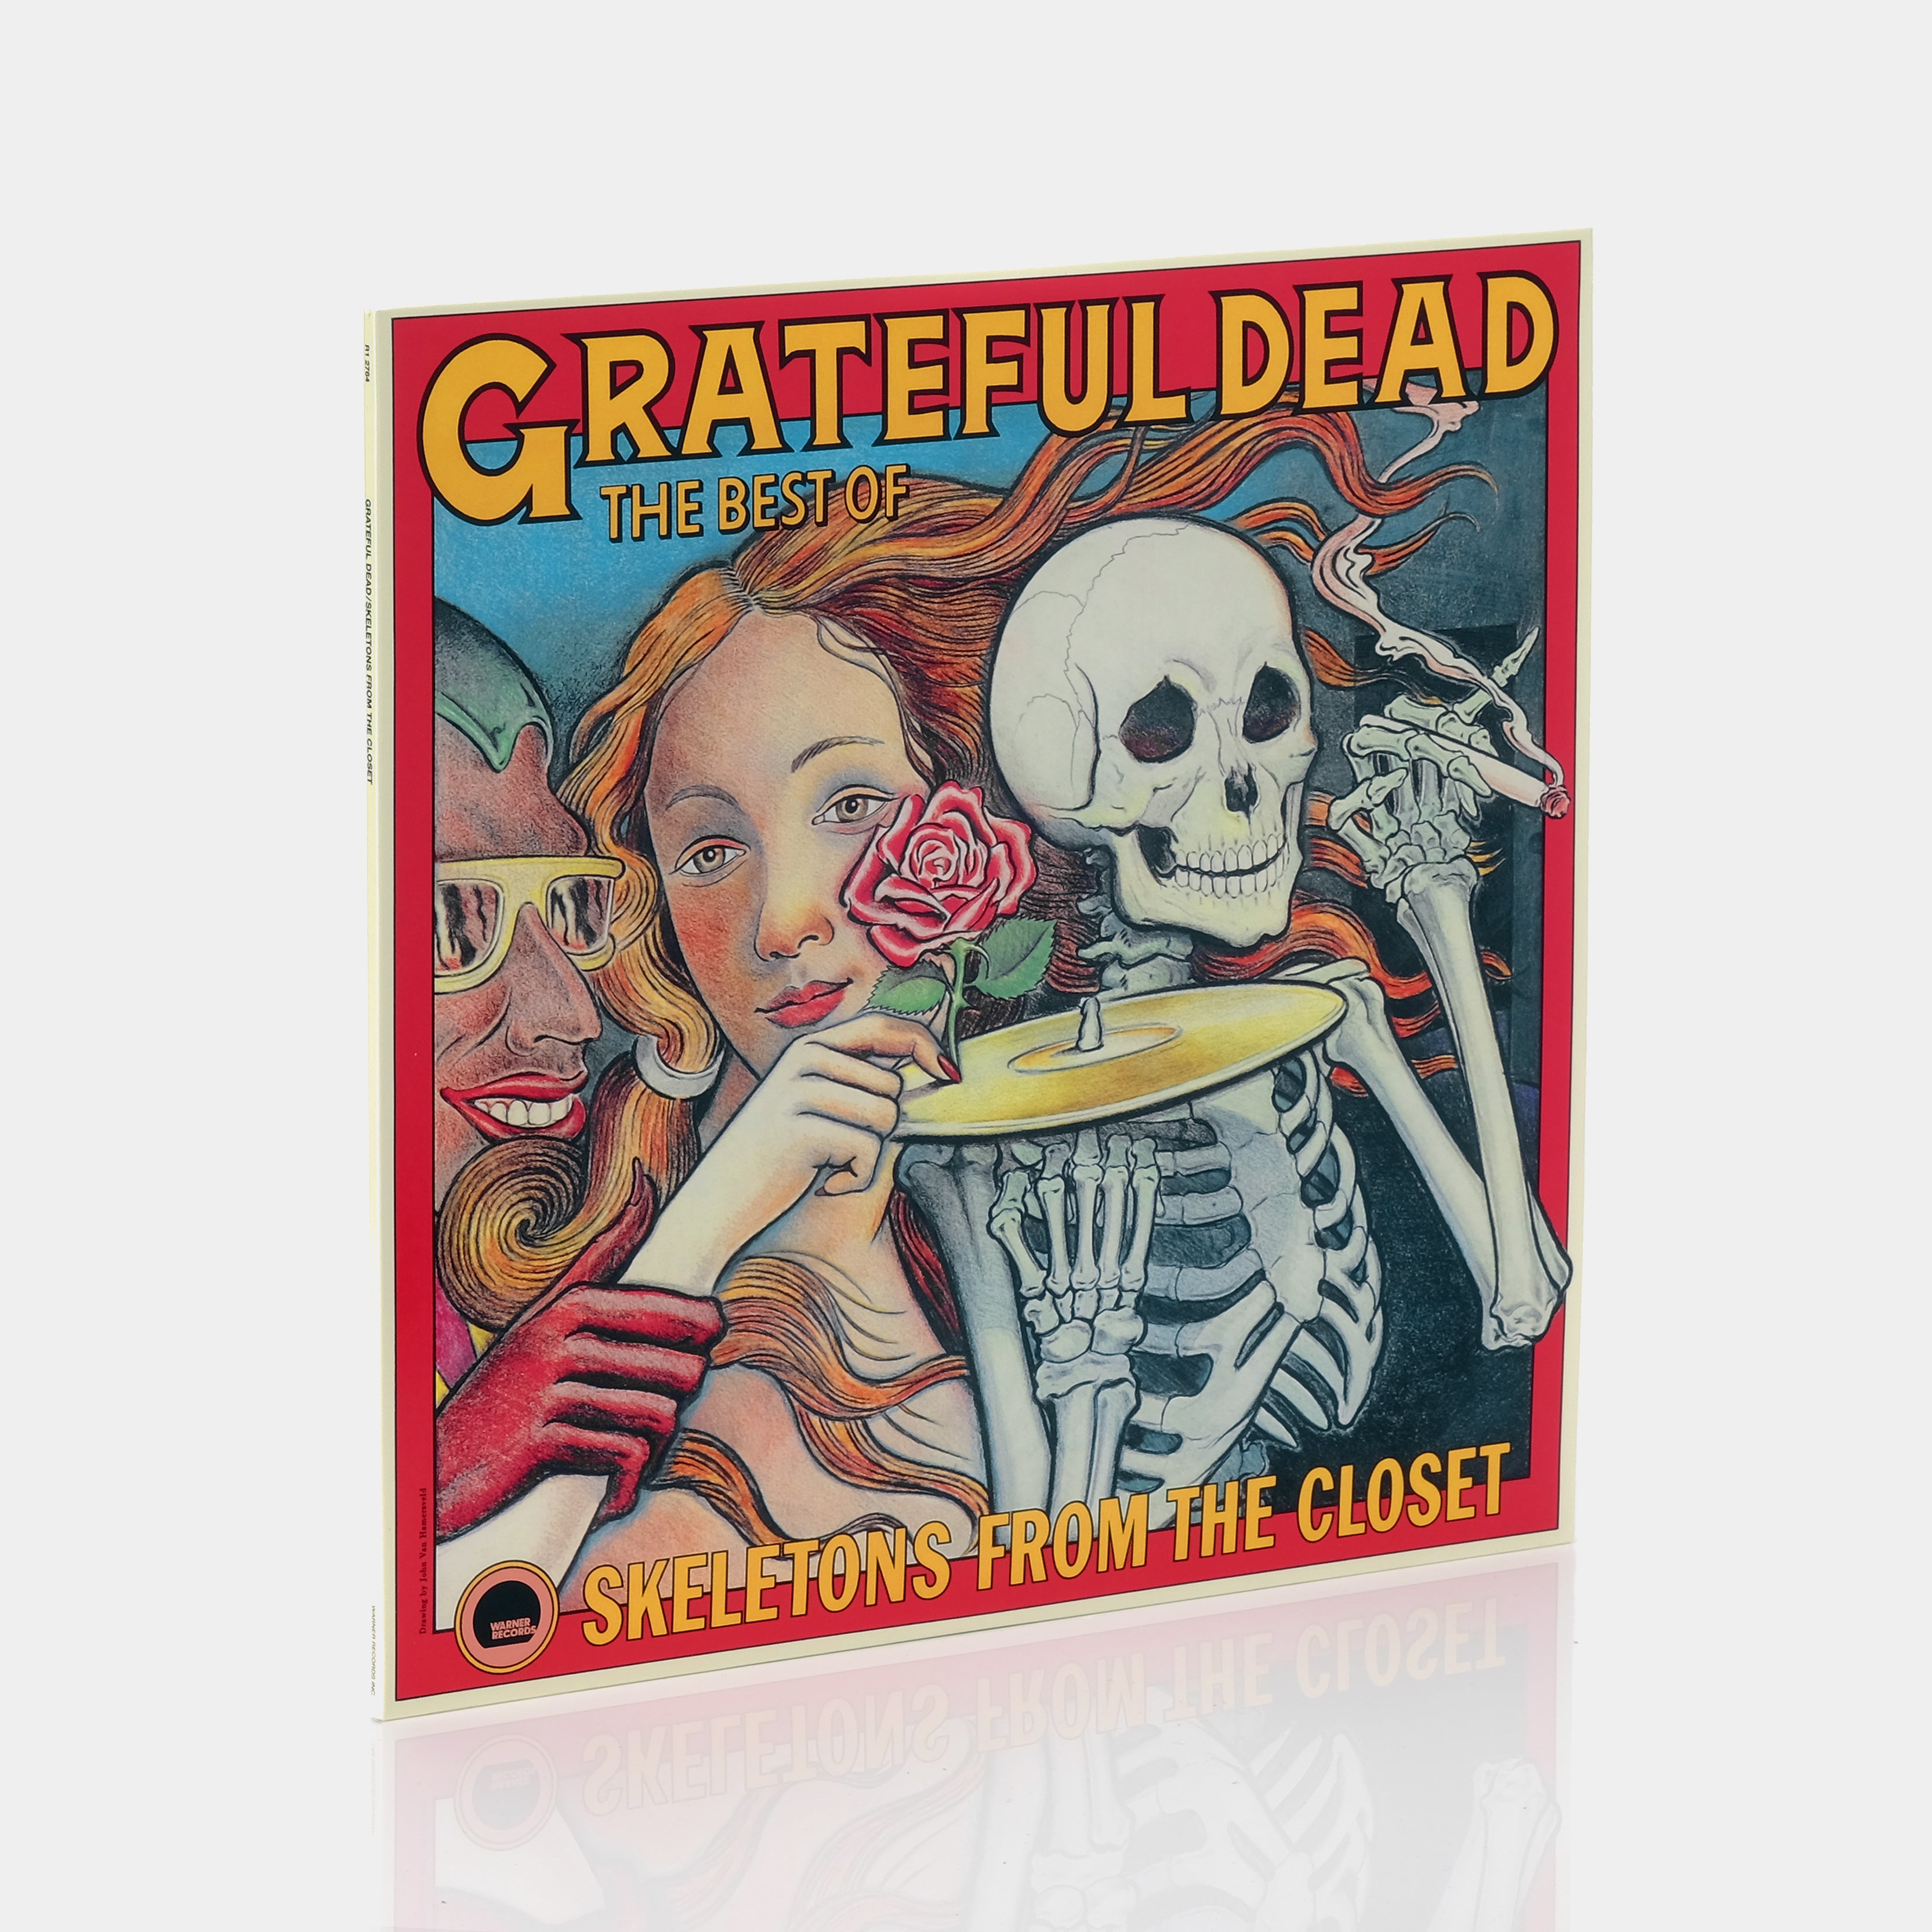 Grateful Dead - The Best Of Skeletons From The Closet LP Vinyl Record